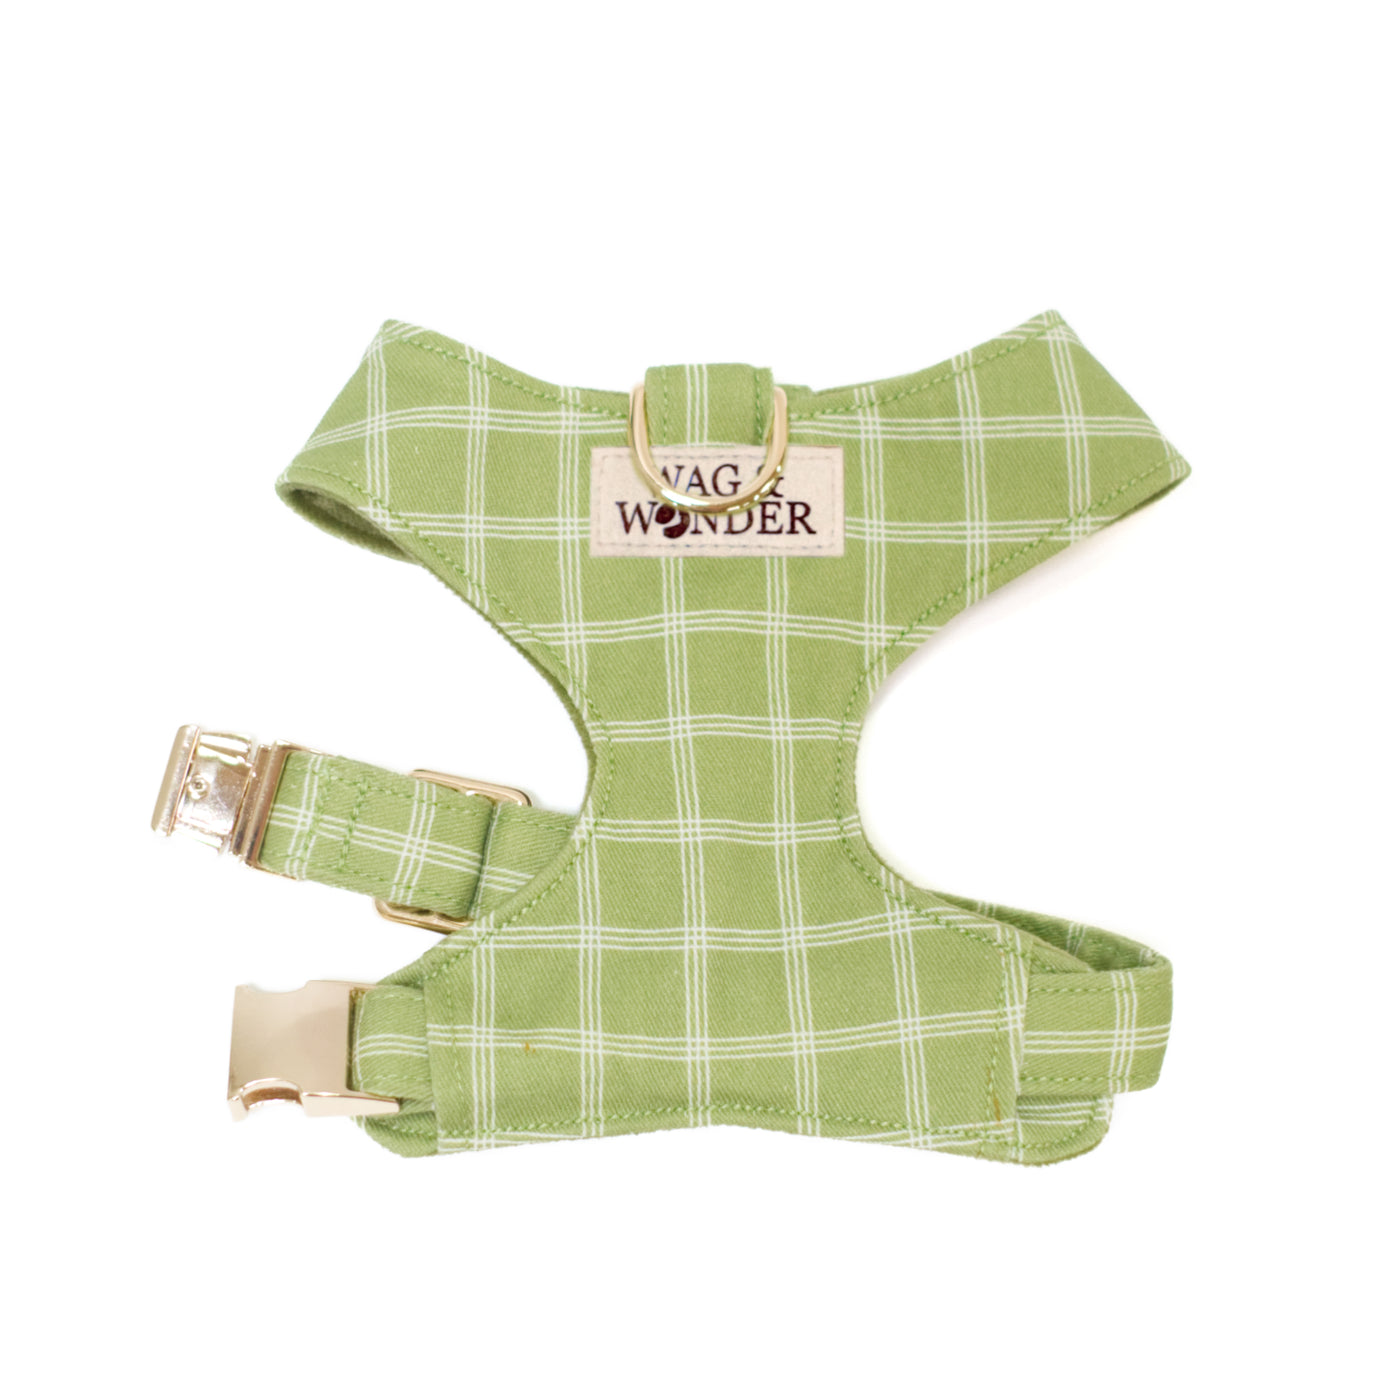 Size XS spring green plaid dog harness with gold hardware